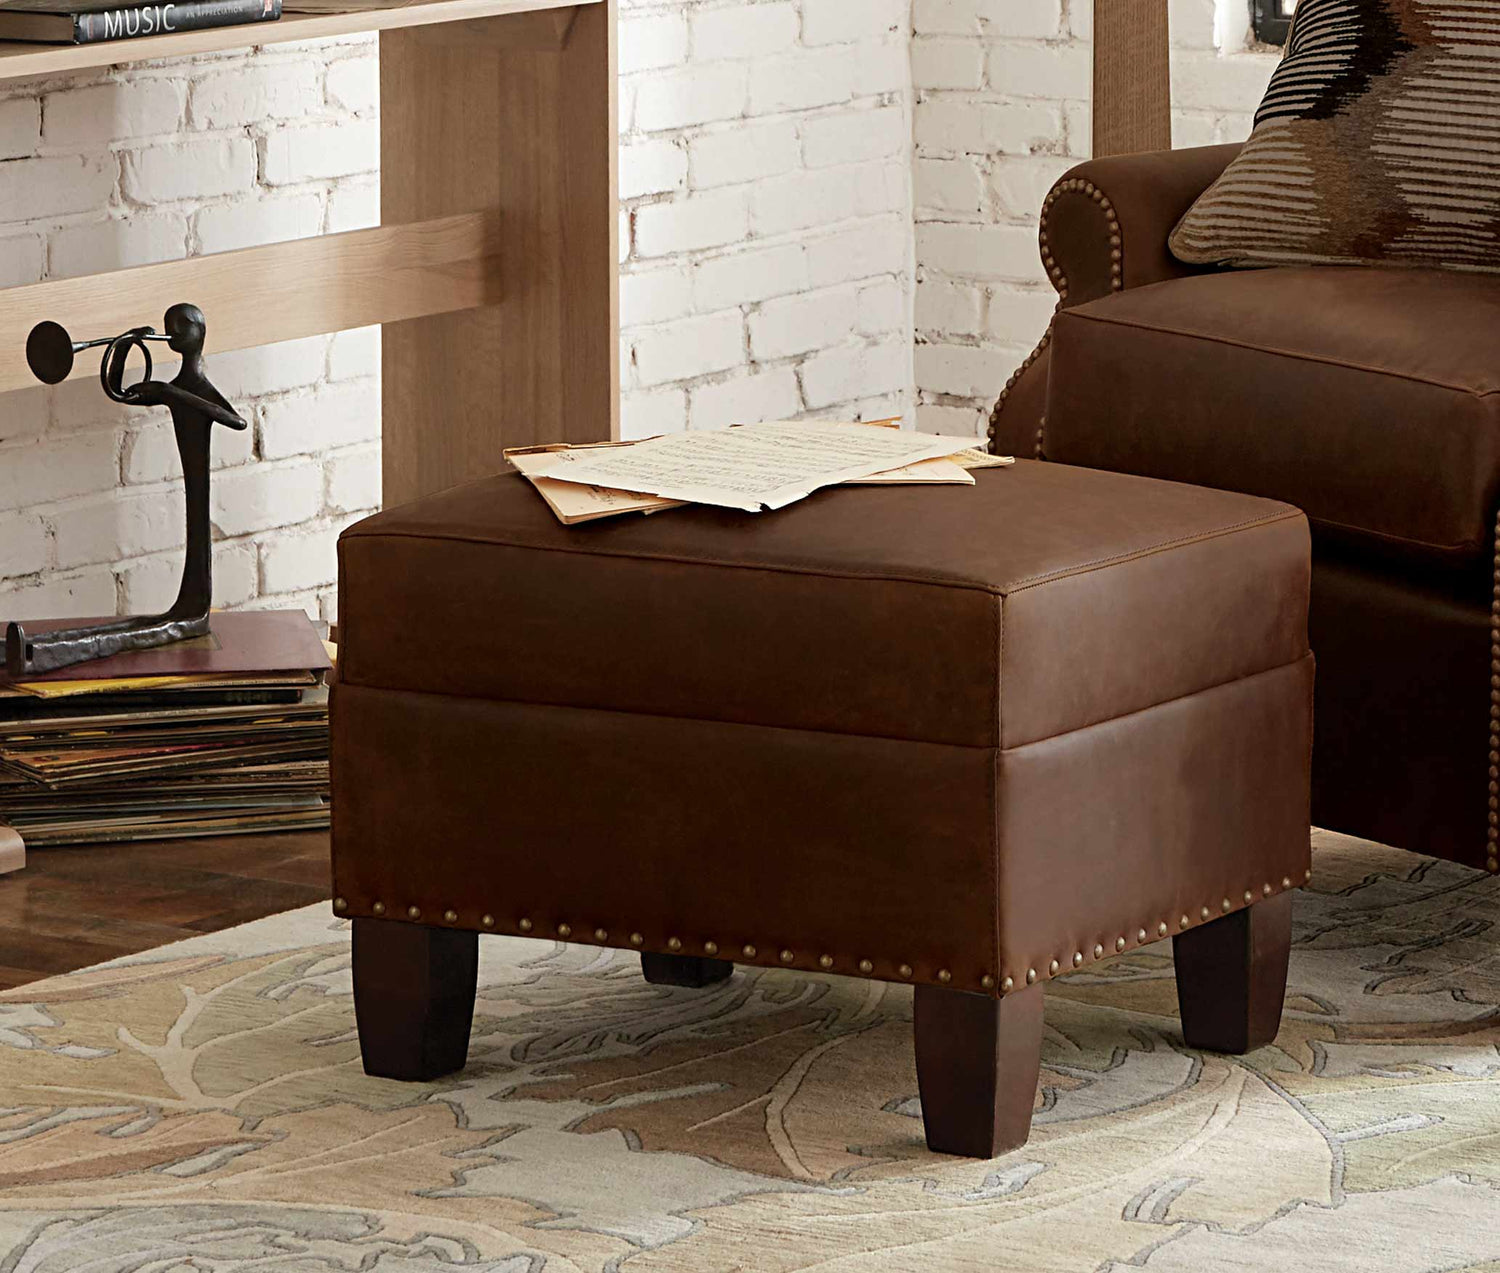 Lifestyle of a dark brown leather Beacon Ottoman that is sitting on top of a flora patterned rug. There are two small magazines sitting on top of the ottoman.